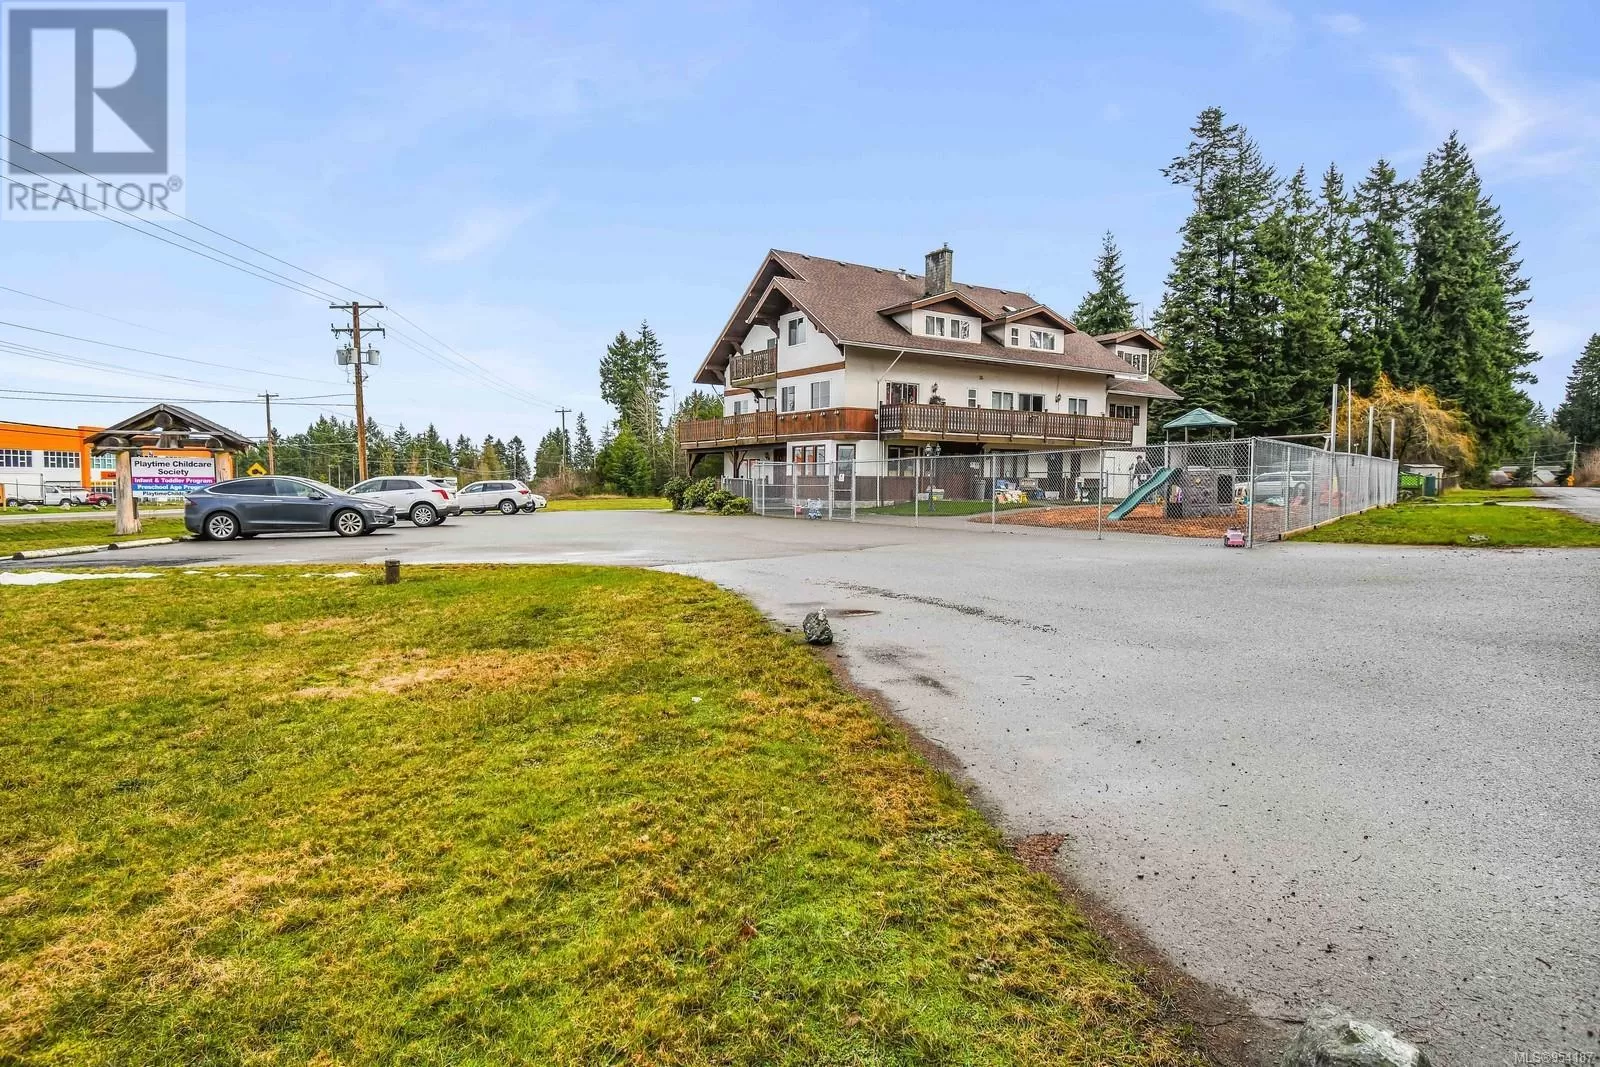 Commercial Mix for rent: 1223 Smithers Rd, Coombs, British Columbia V9P 2C1